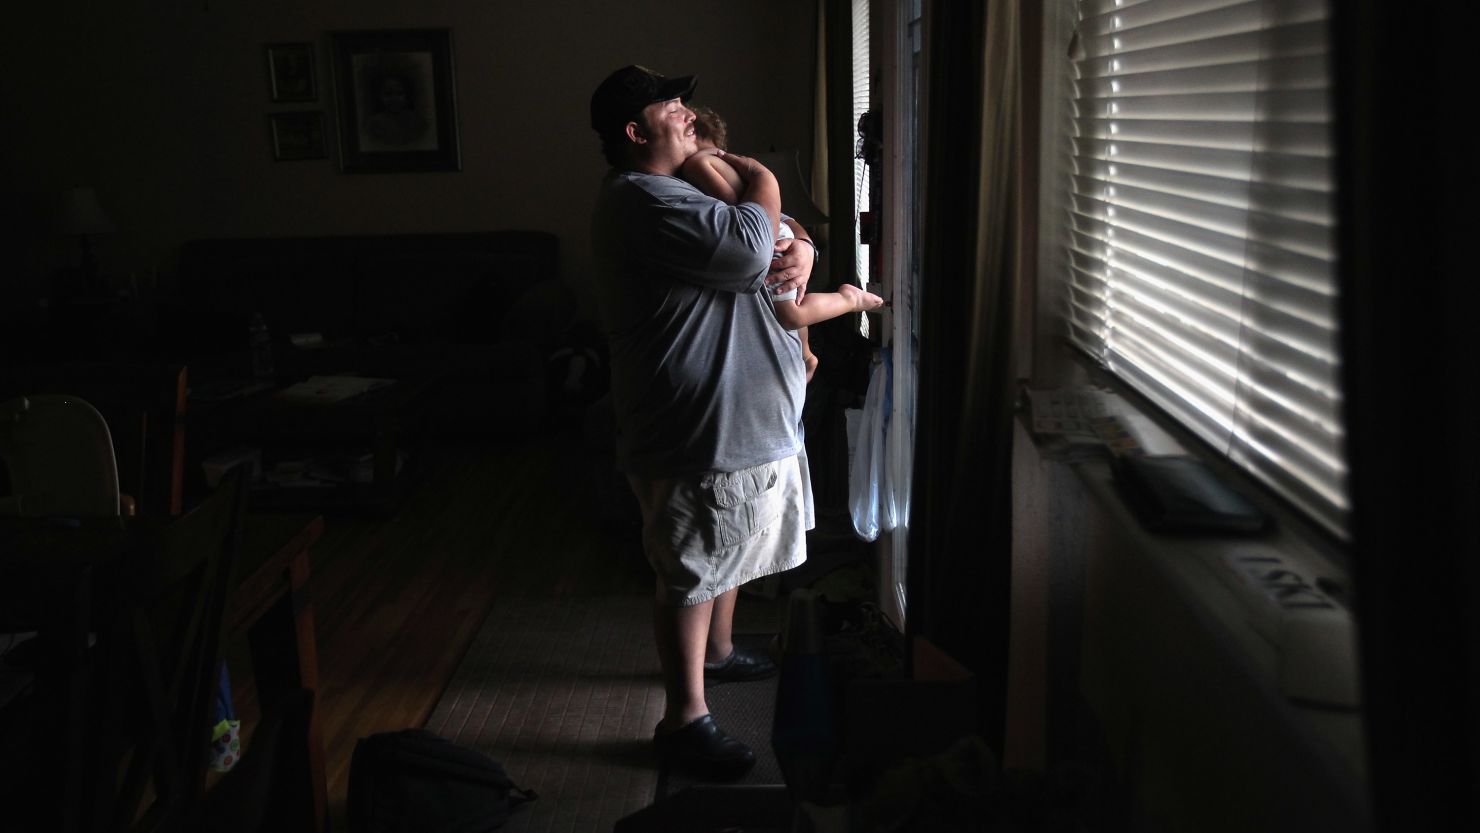 Veterans returning from Iraq and Afghanistan facing PTSD and other injuries can face wait times in processing their disability benefits of 600 days, says Paul Rieckhoff.